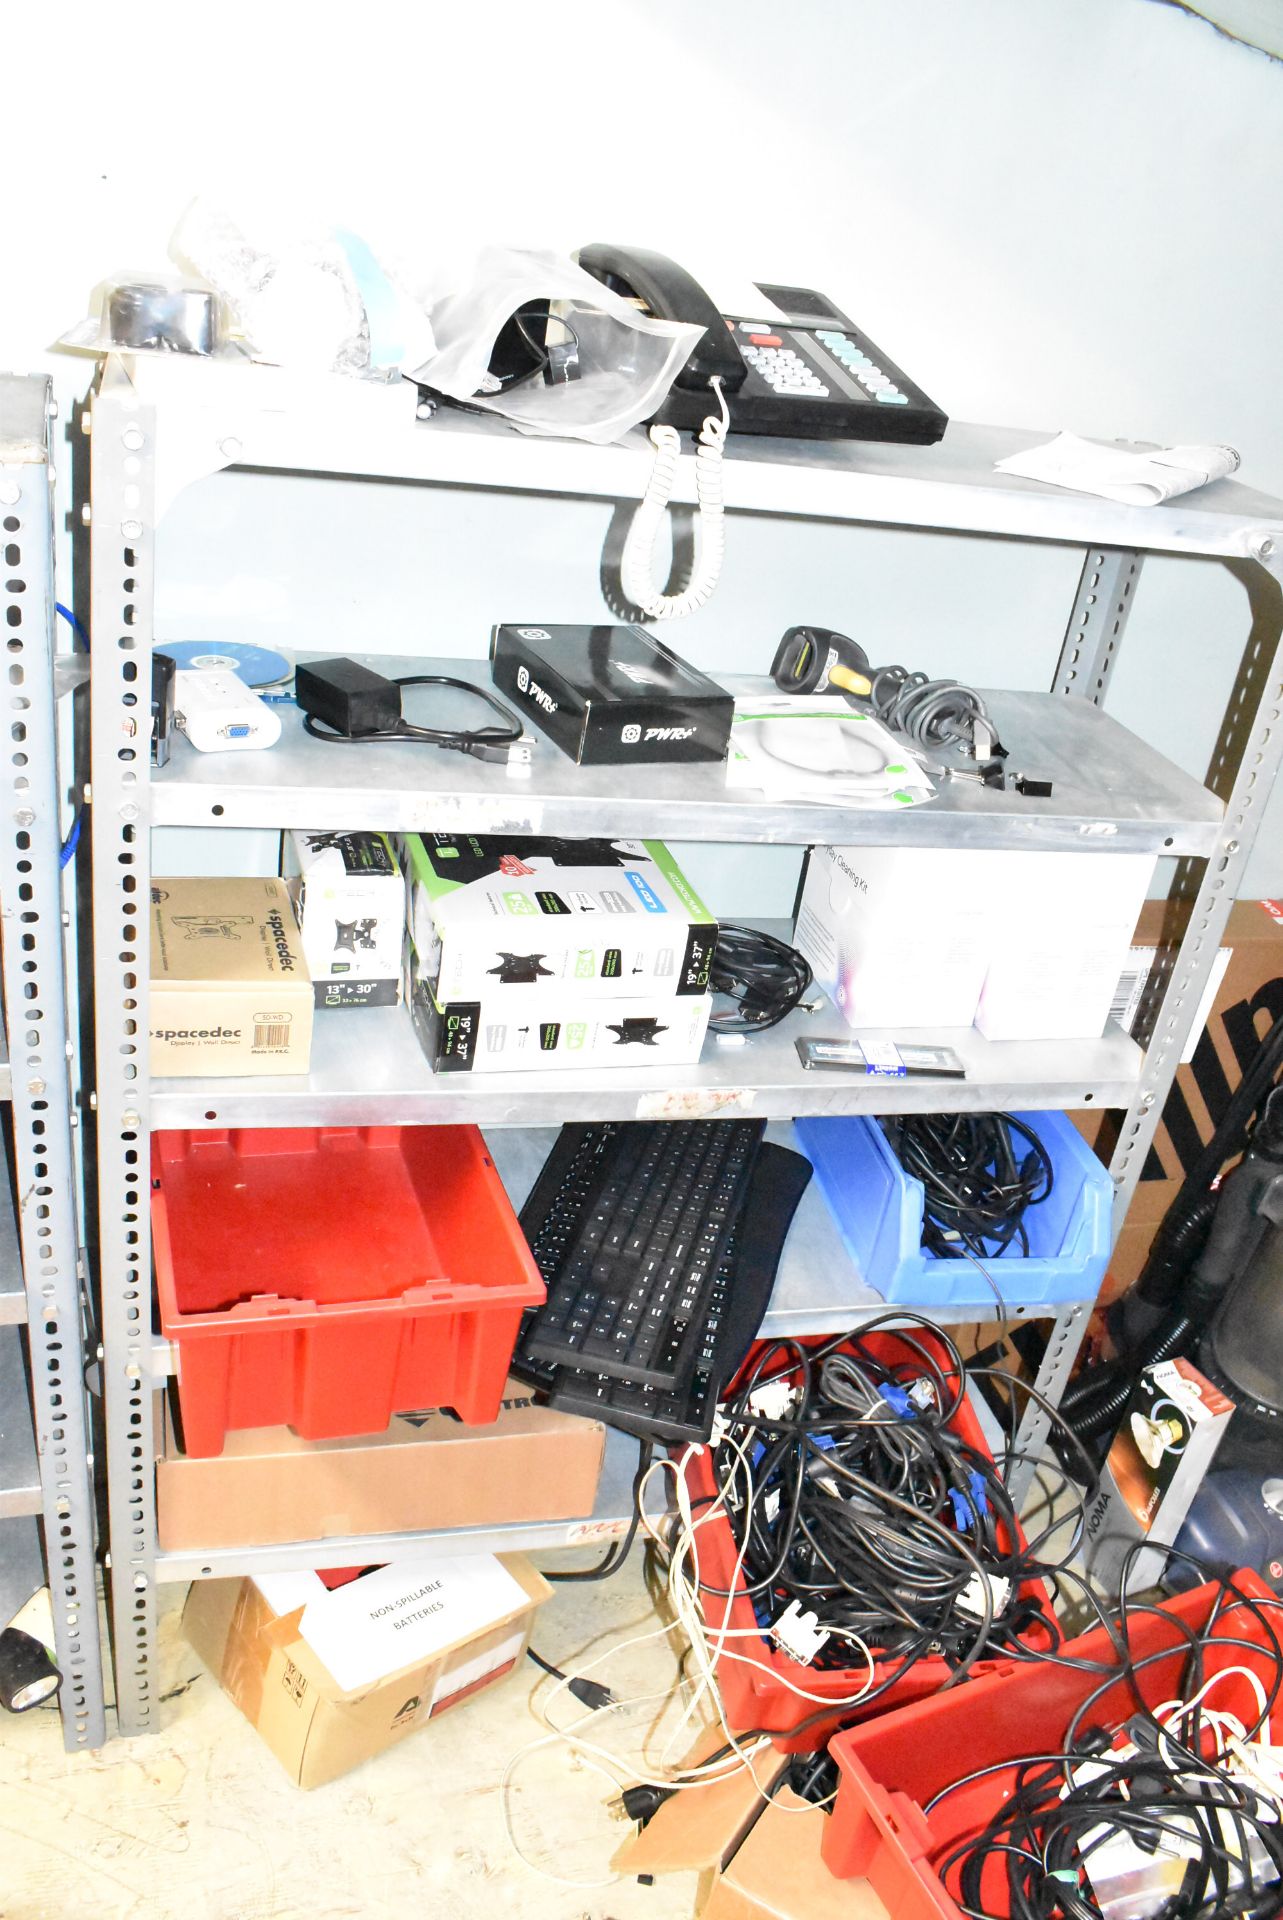 LOT/ SHELF WITH CONTENTS CONSISTING OF SANYO TV, COMPUTER CABLES & IT SUPPORT EQUIPMENT - Image 3 of 4